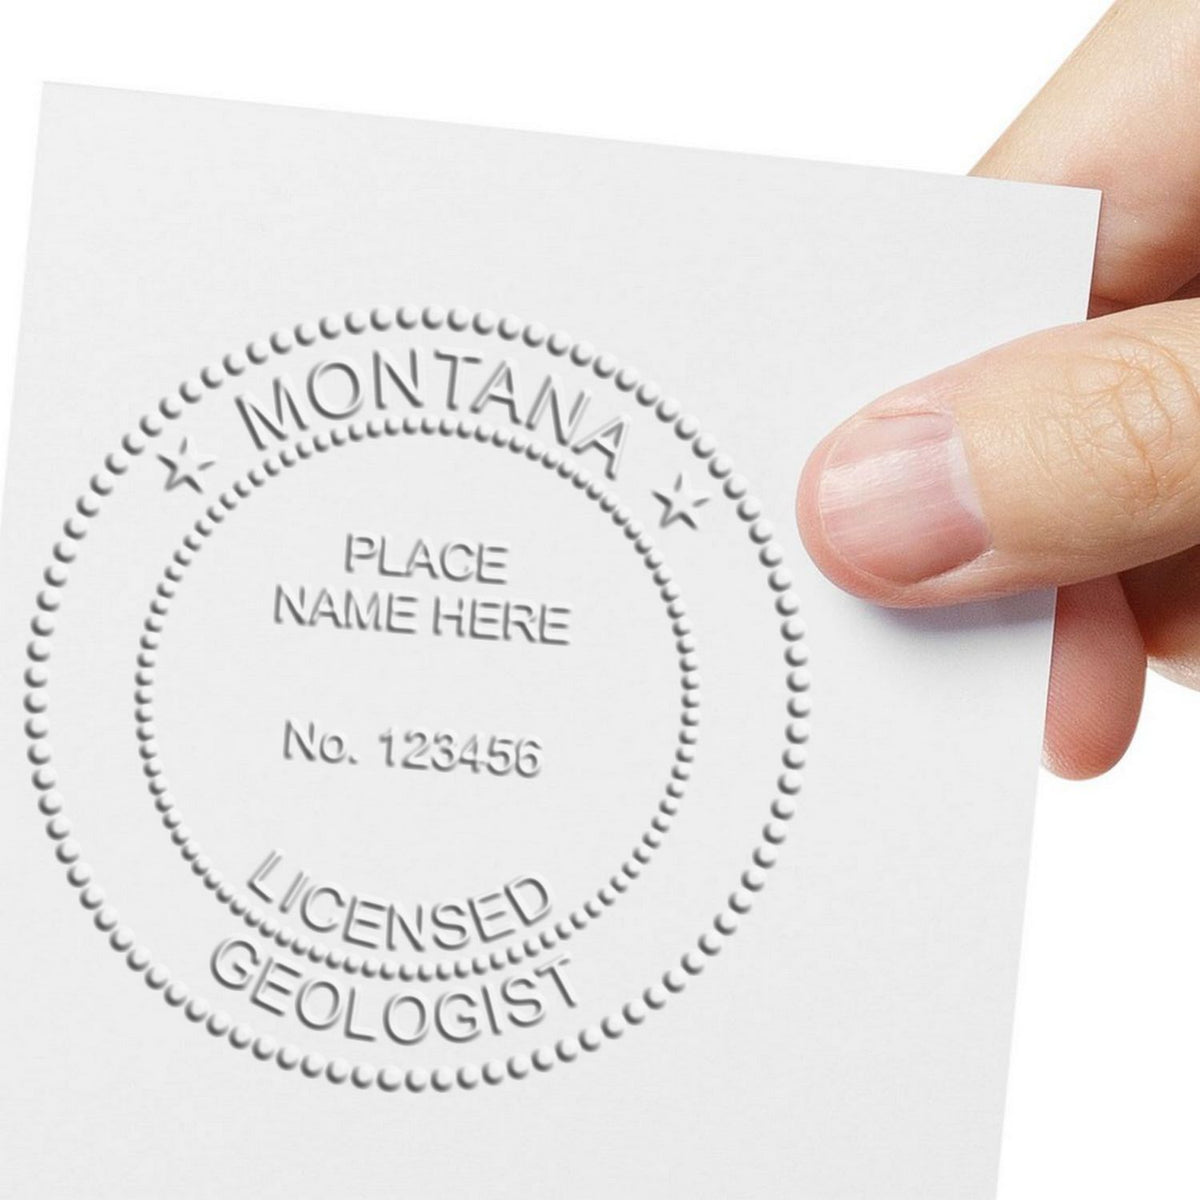 An alternative view of the Soft Montana Professional Geologist Seal stamped on a sheet of paper showing the image in use